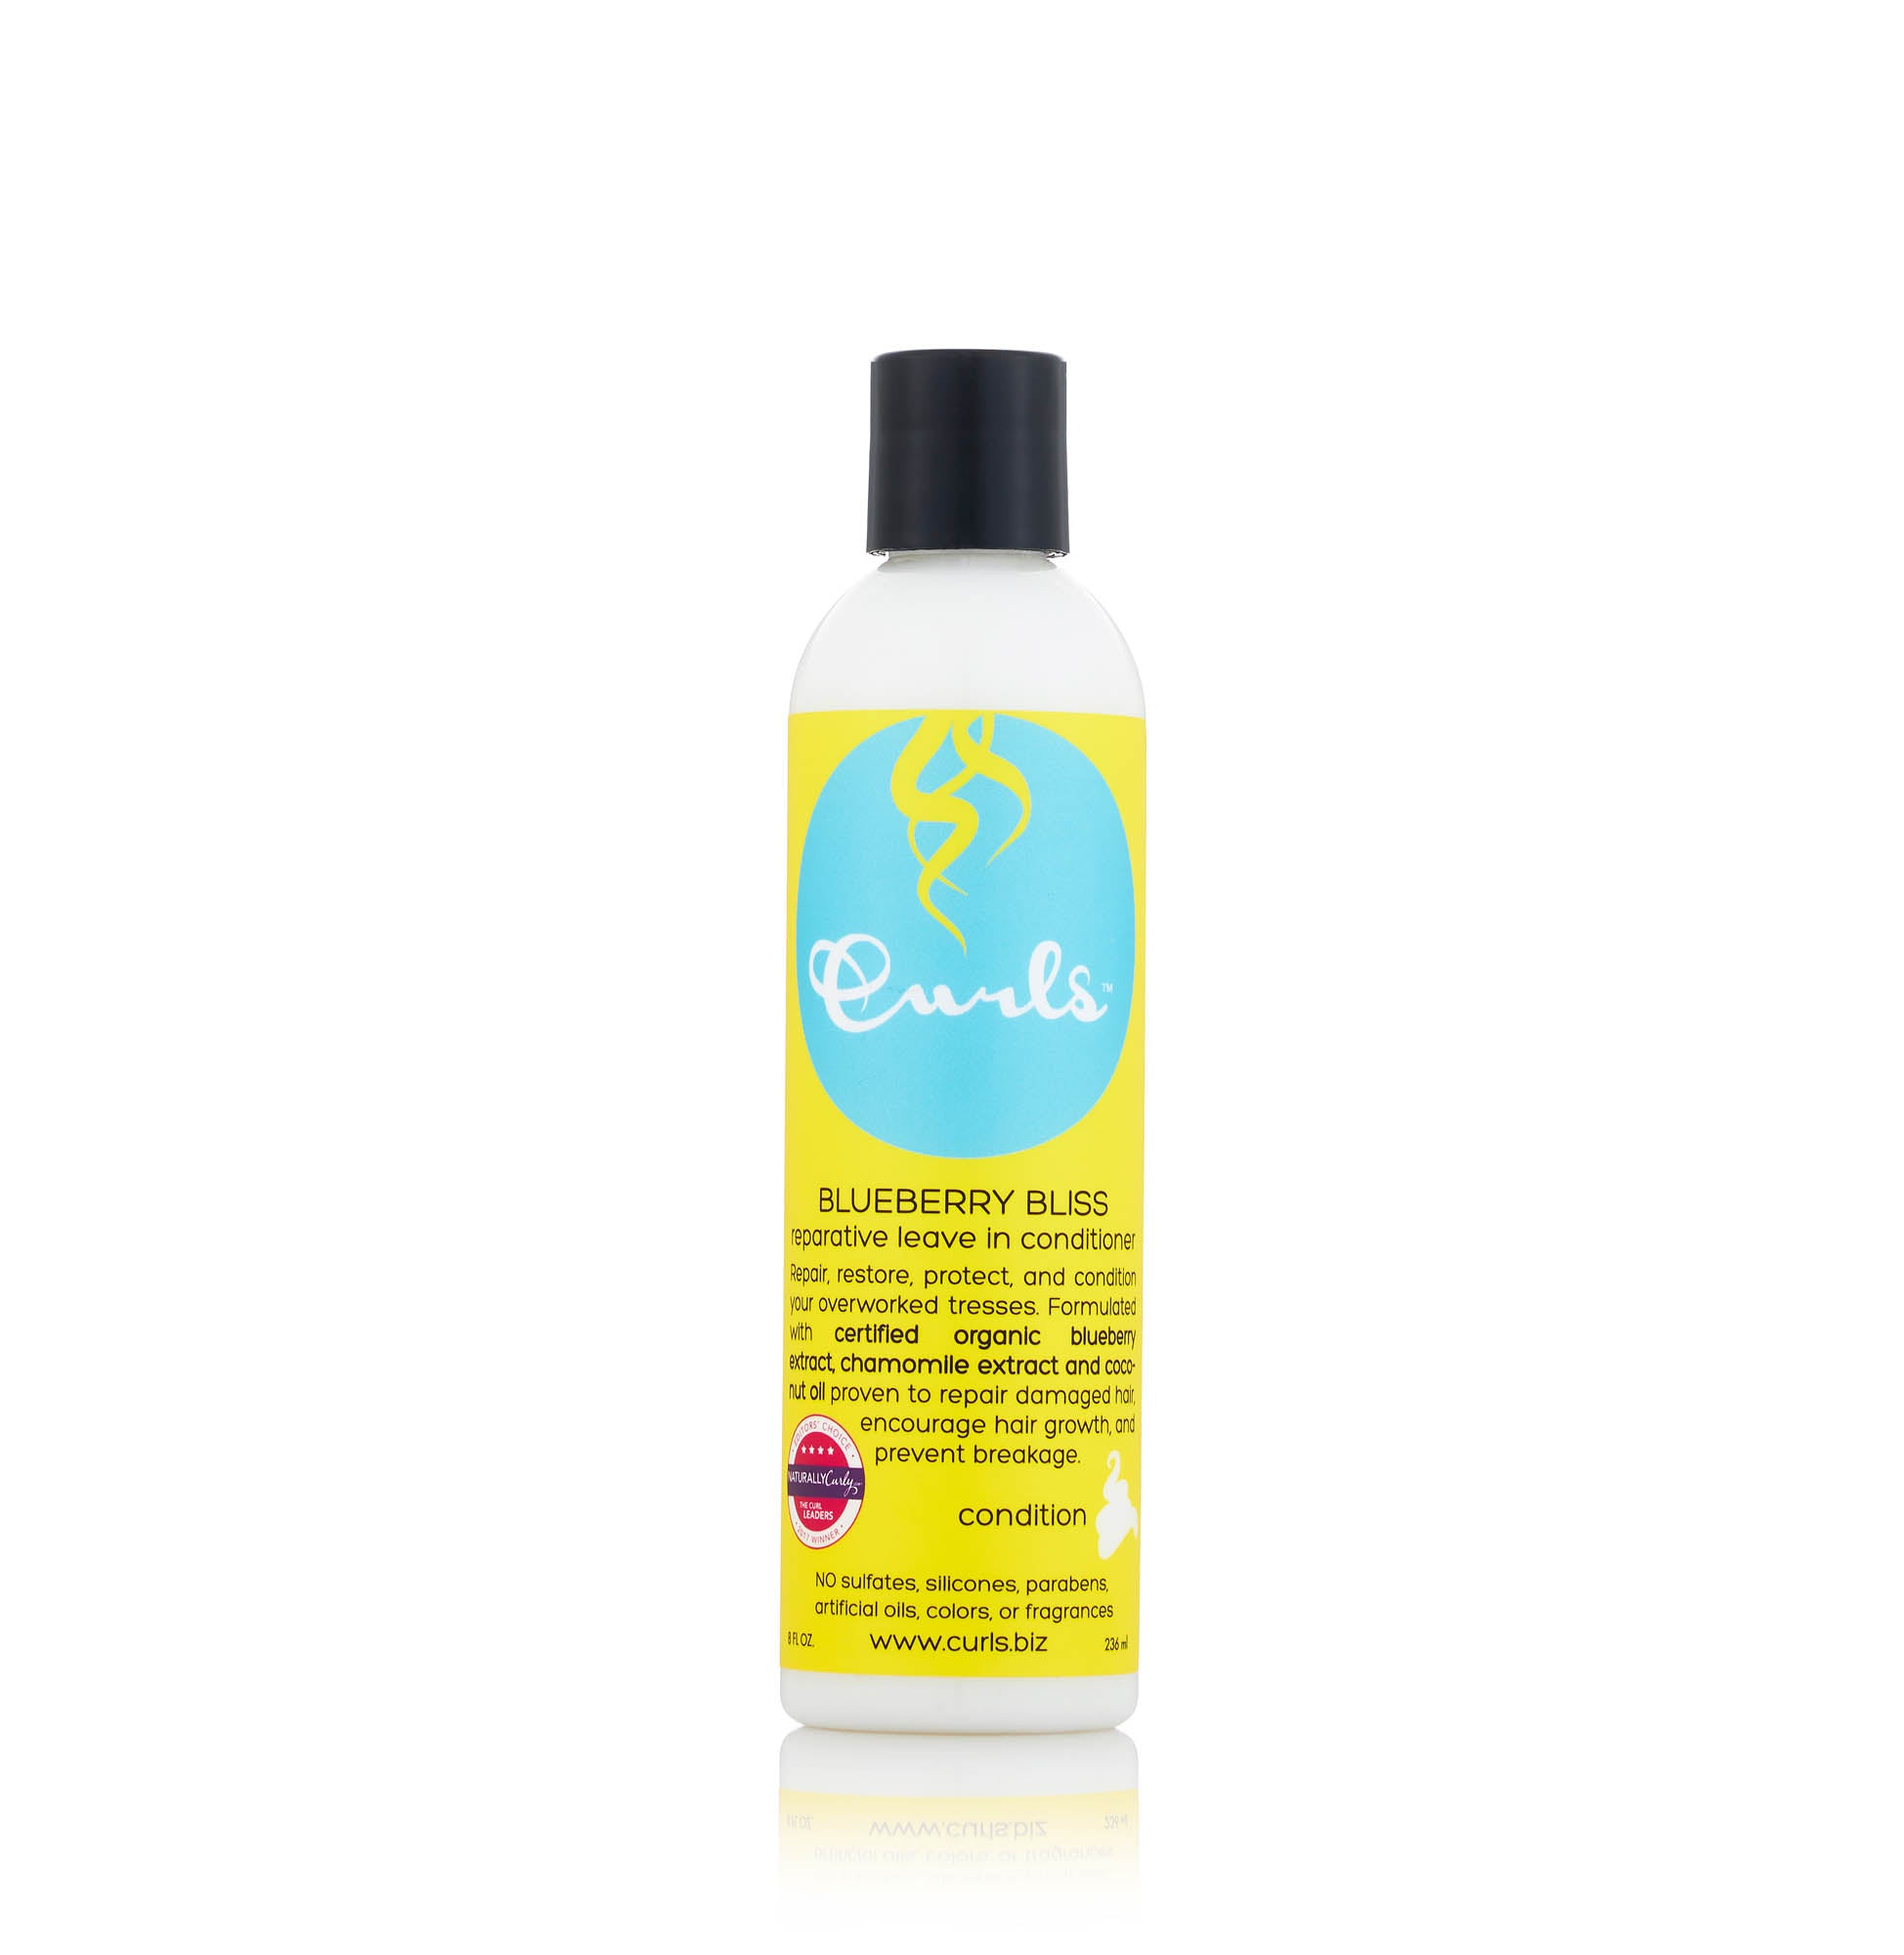 Curls Blueberry Bliss Reparative Leave-In Conditioner